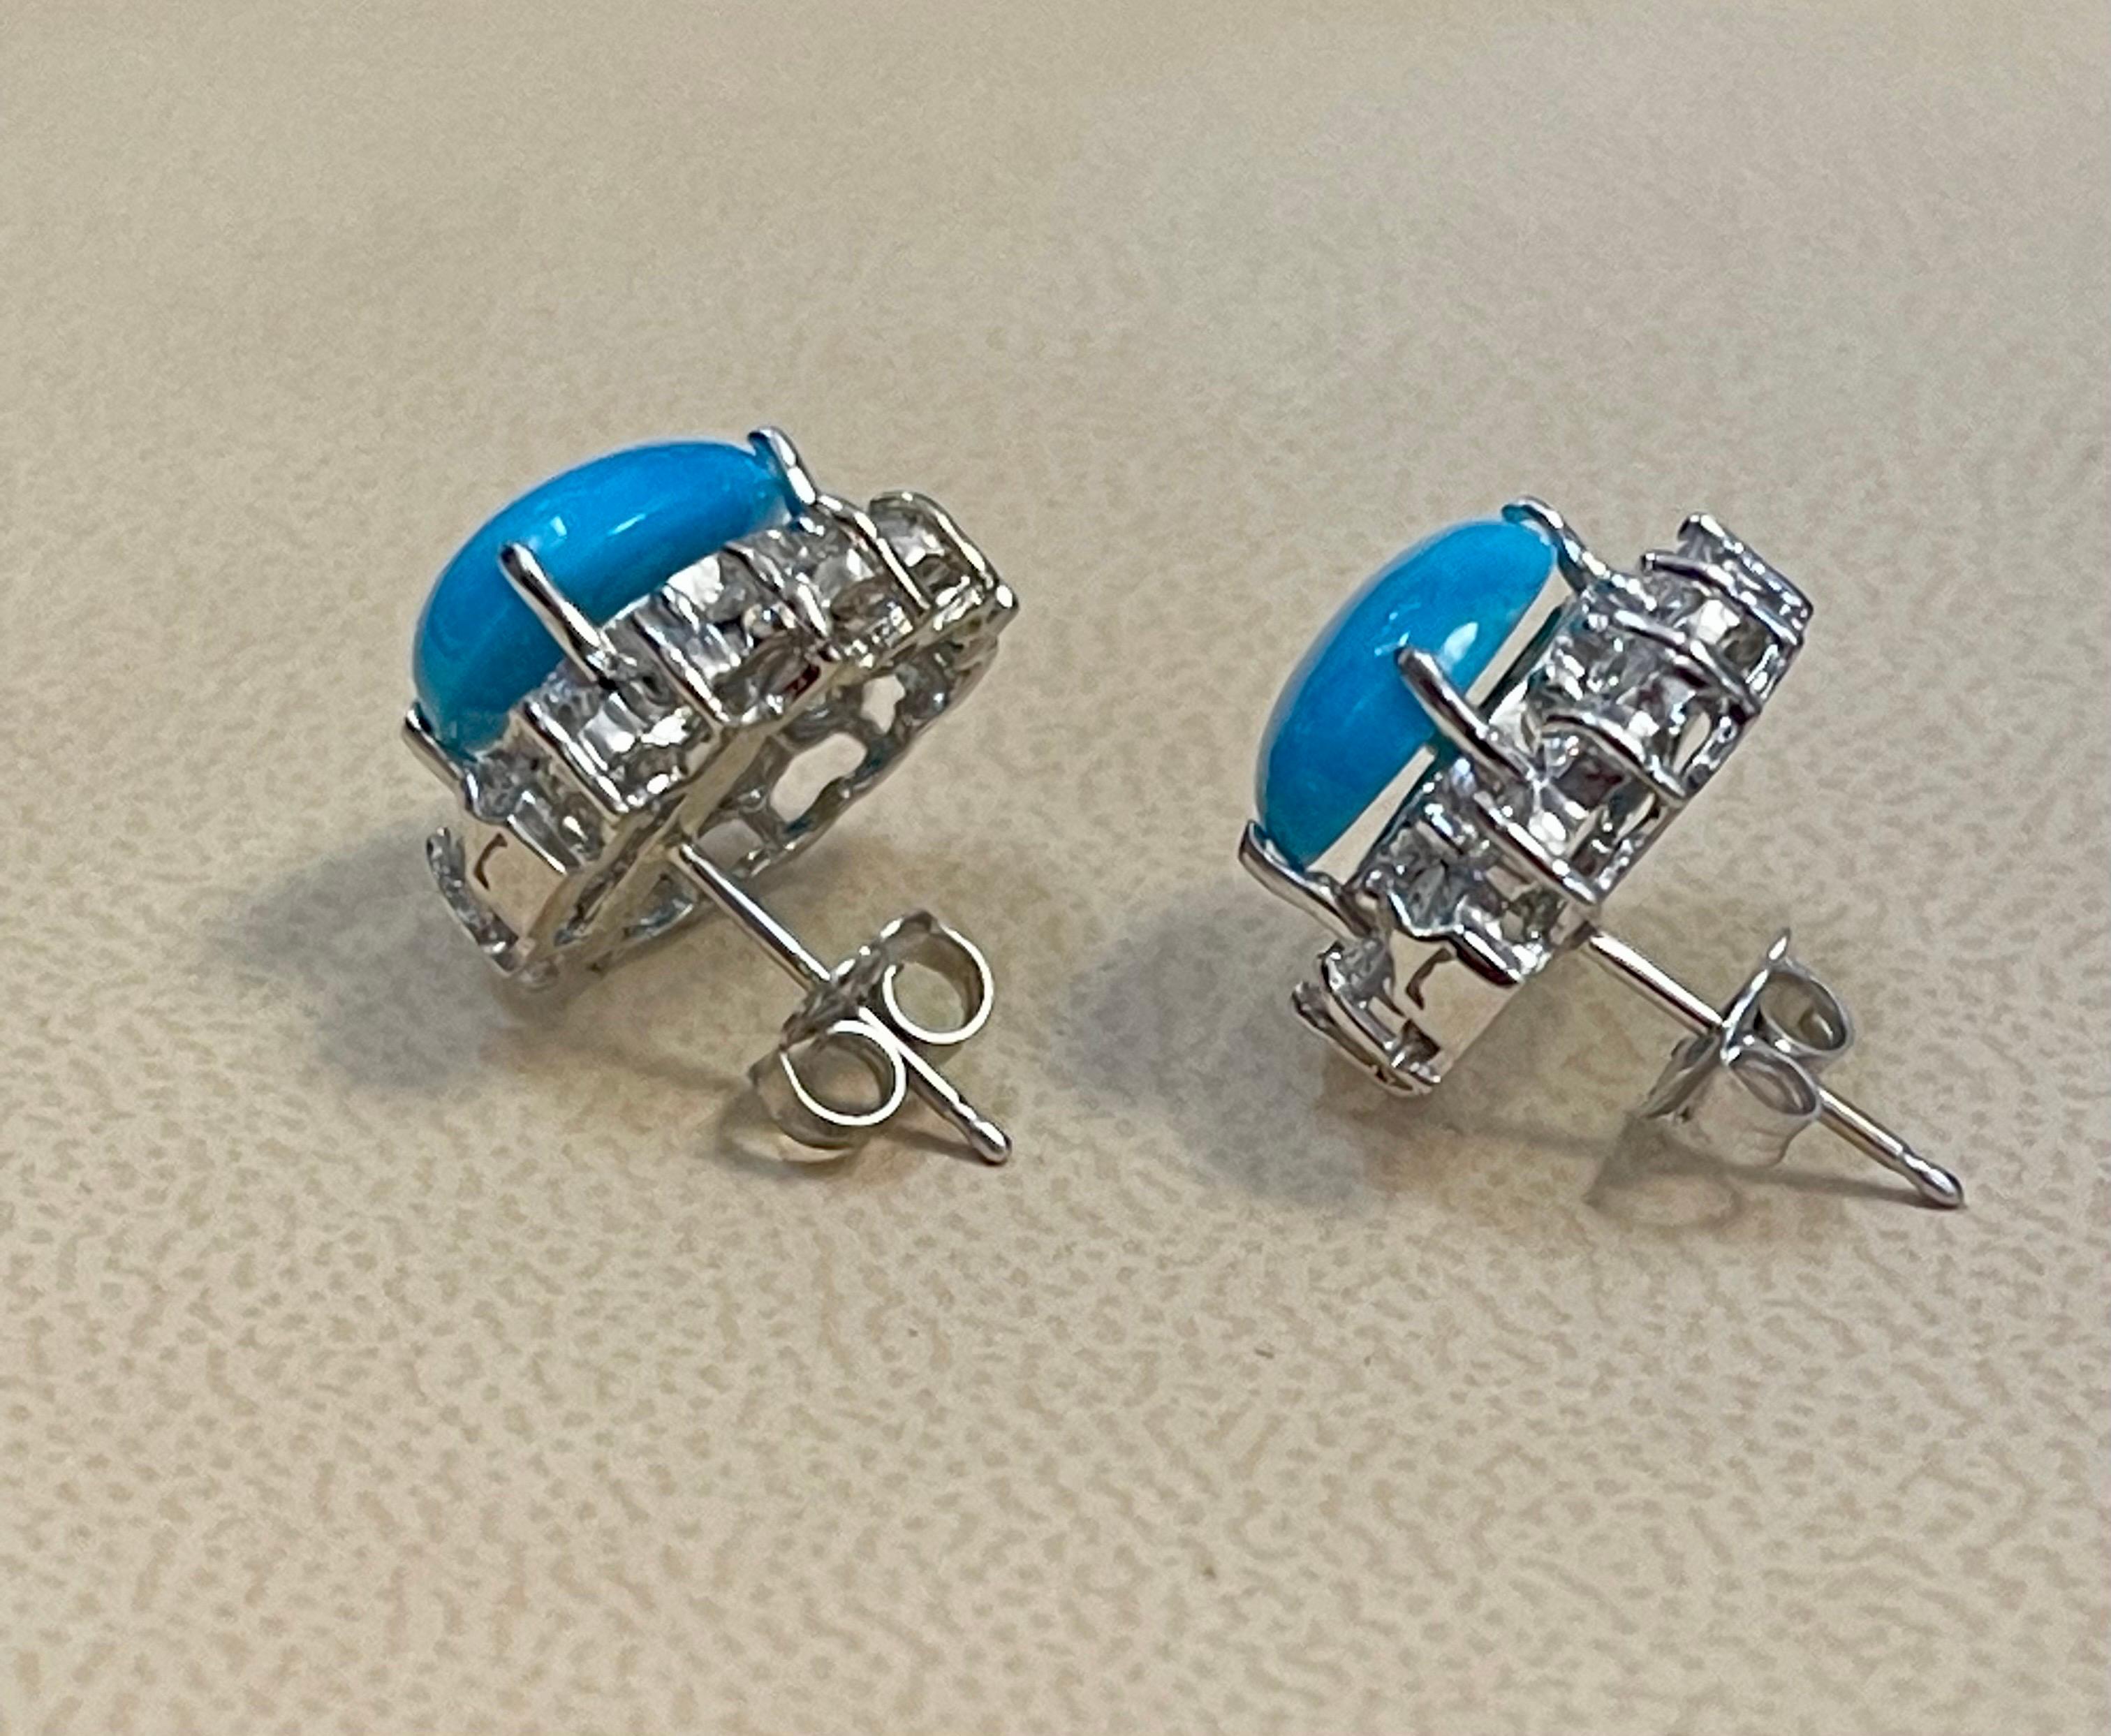 8 Ct Oval Sleeping Beauty Turquoise & 1 Ct Diamond Stud Earrings 14 K White Gold, Post Back
This exquisite pair of earrings are beautifully crafted with 14 karat White gold .
Weight of 14 K gold 5.5 Grams
Turquoise pair is natural sleeping beauty 